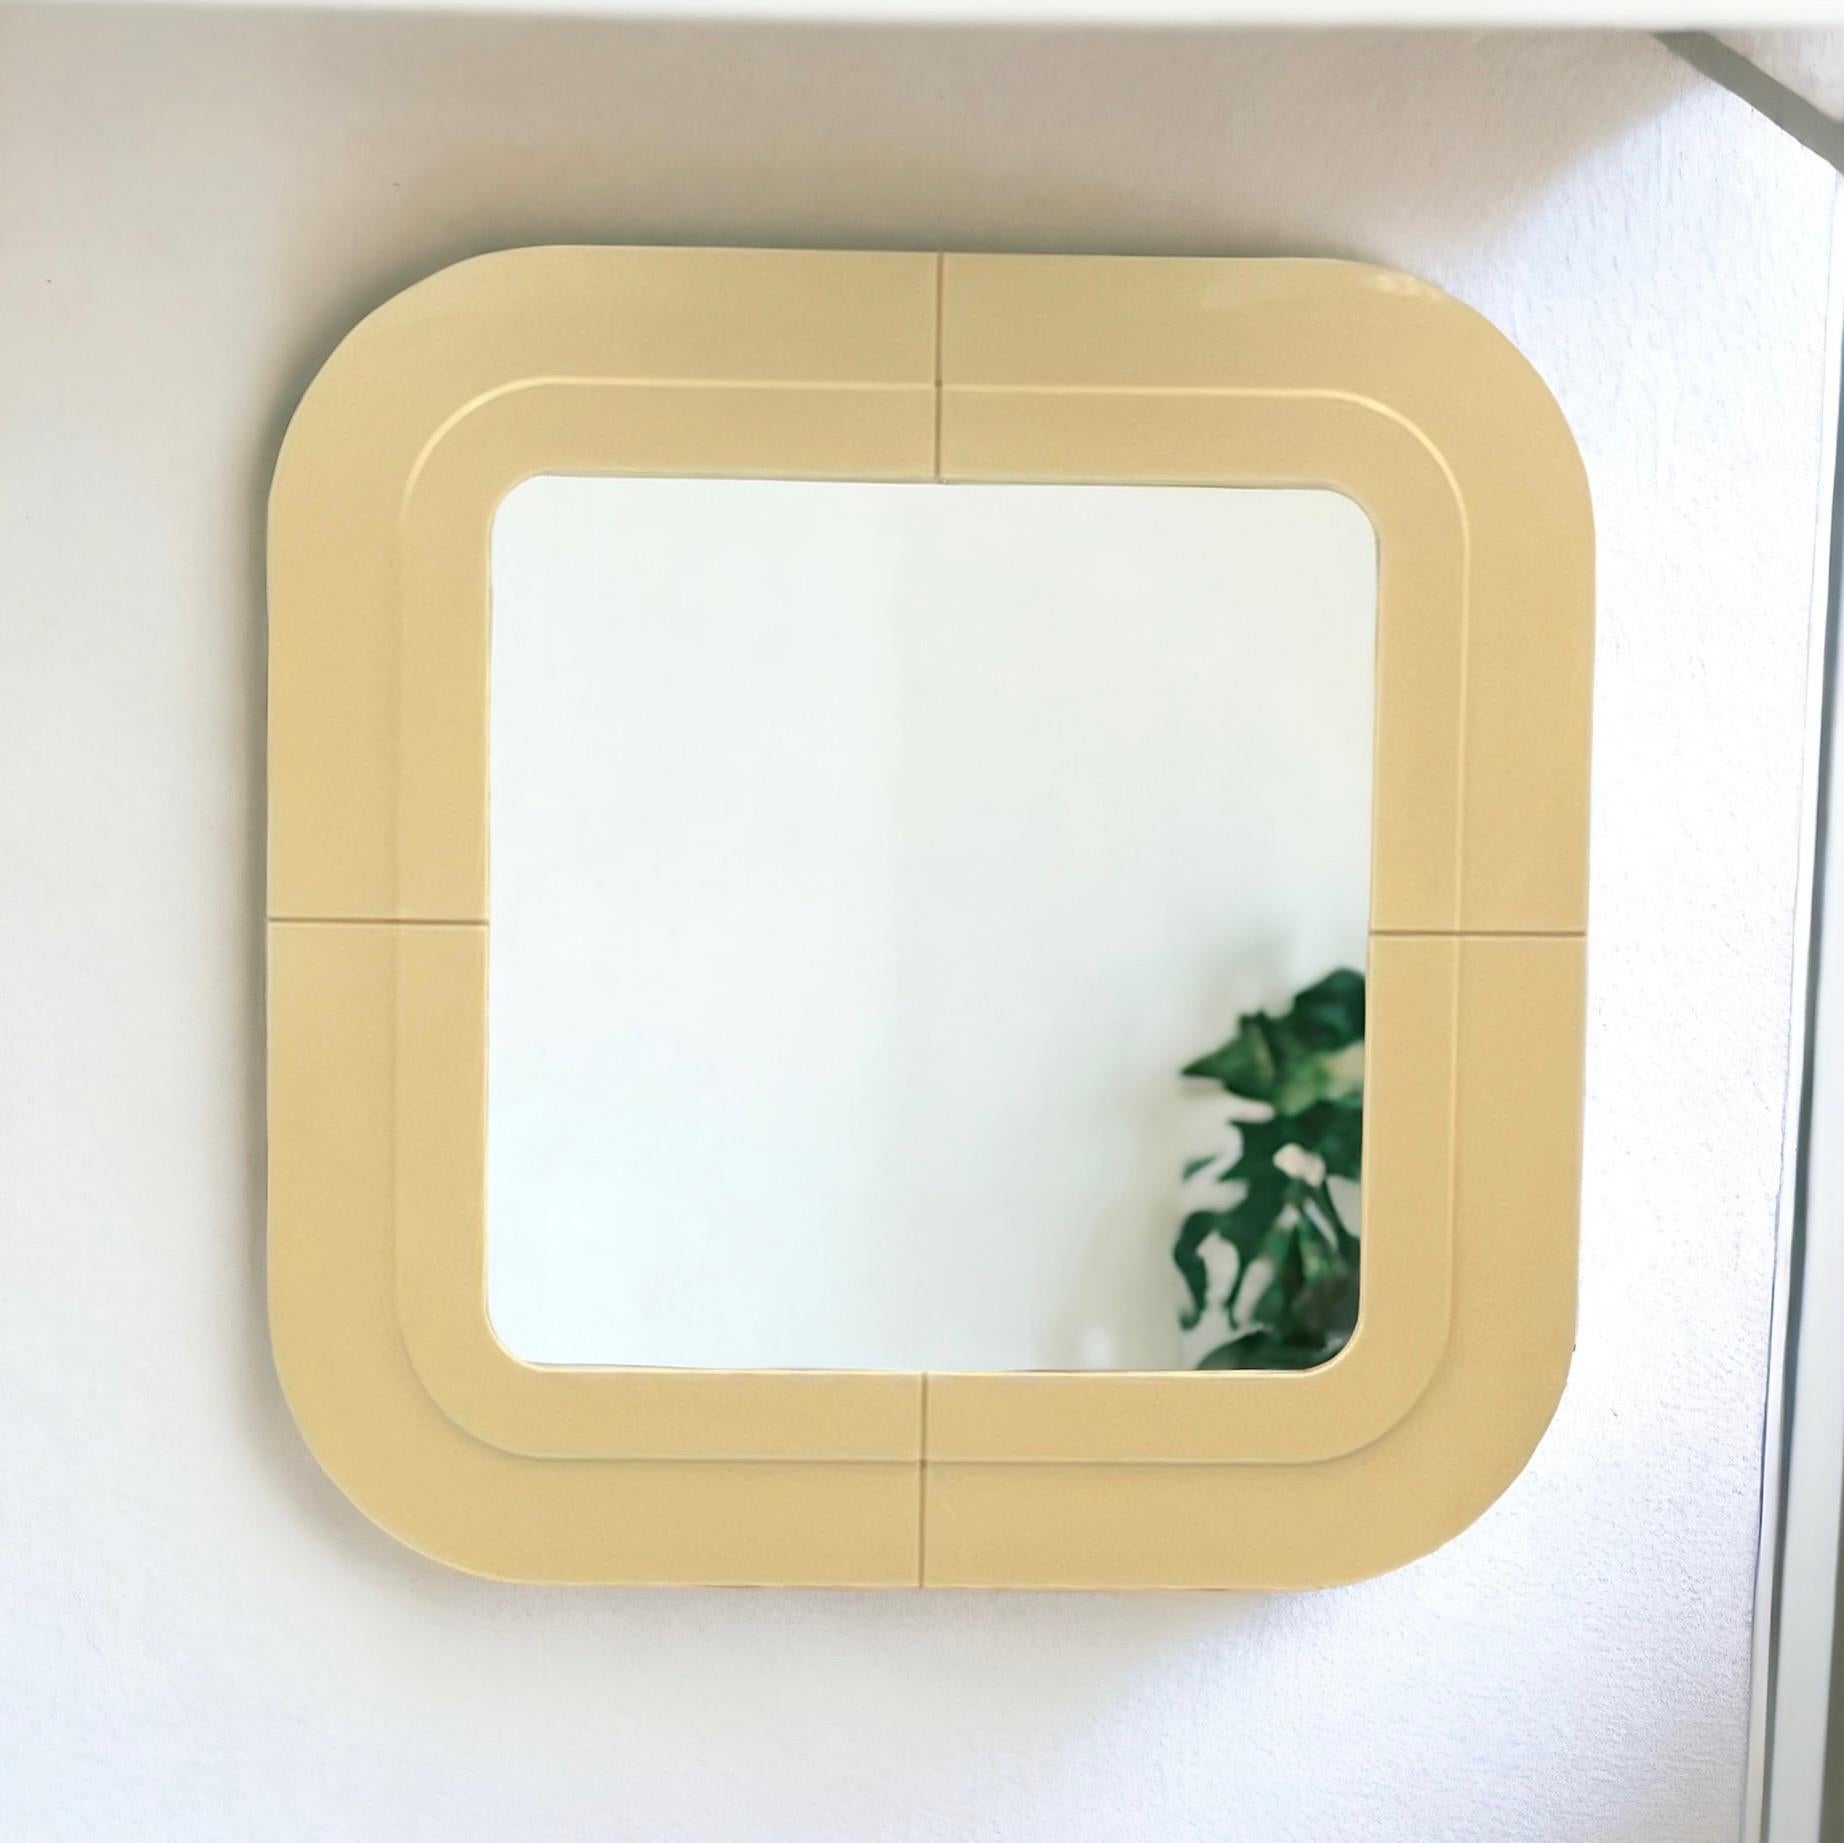 Vintage Wall Mirror by Anna Castelli Ferrieri for Kartell - 1960s For Sale 4